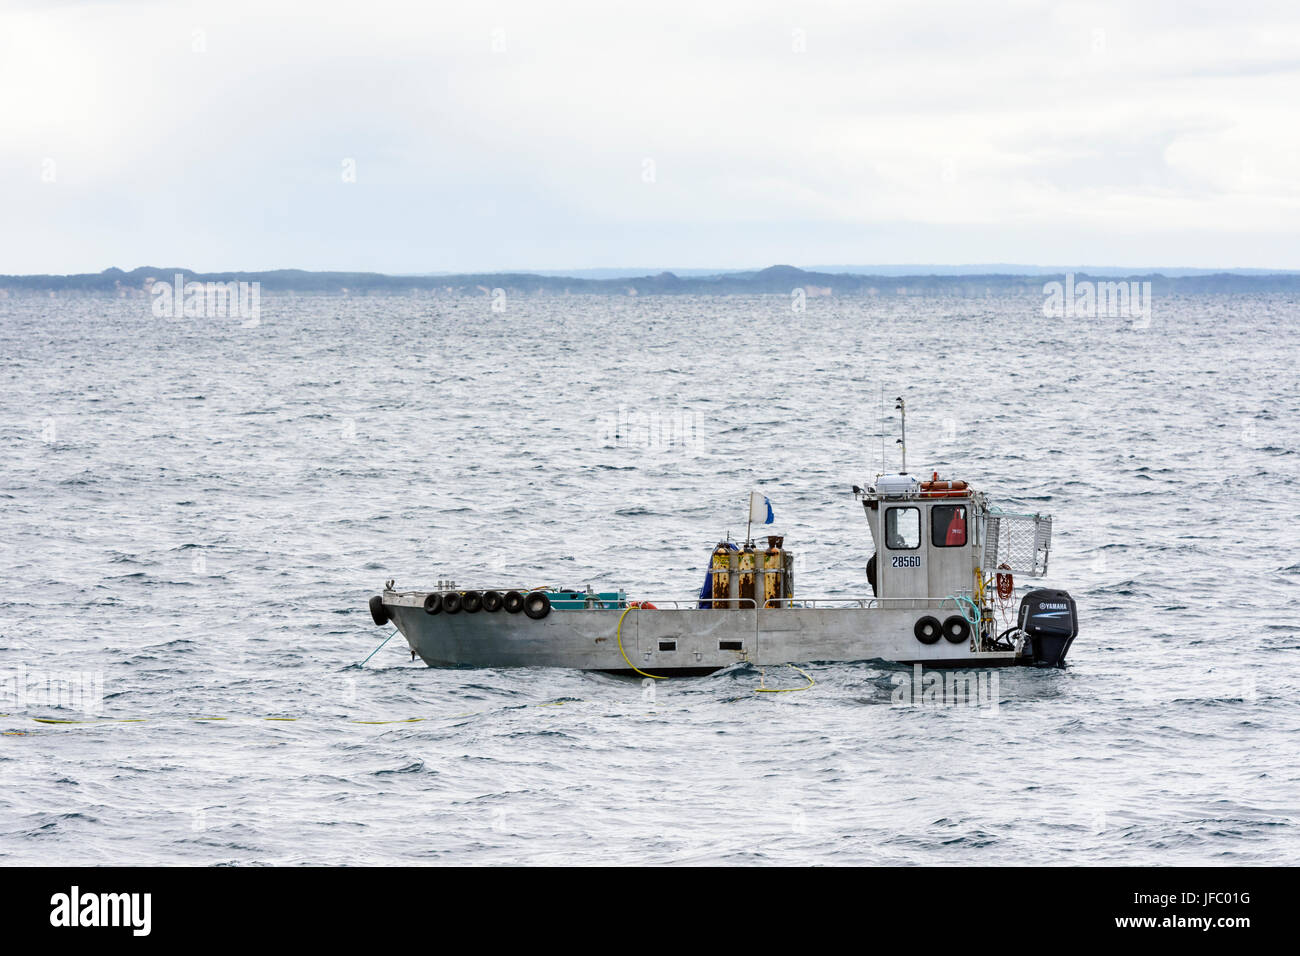 A small dive vessel used in the wild farming of Abalone shellfish in Flinders Bay, off the coast of Augusta, Western Australia Stock Photo